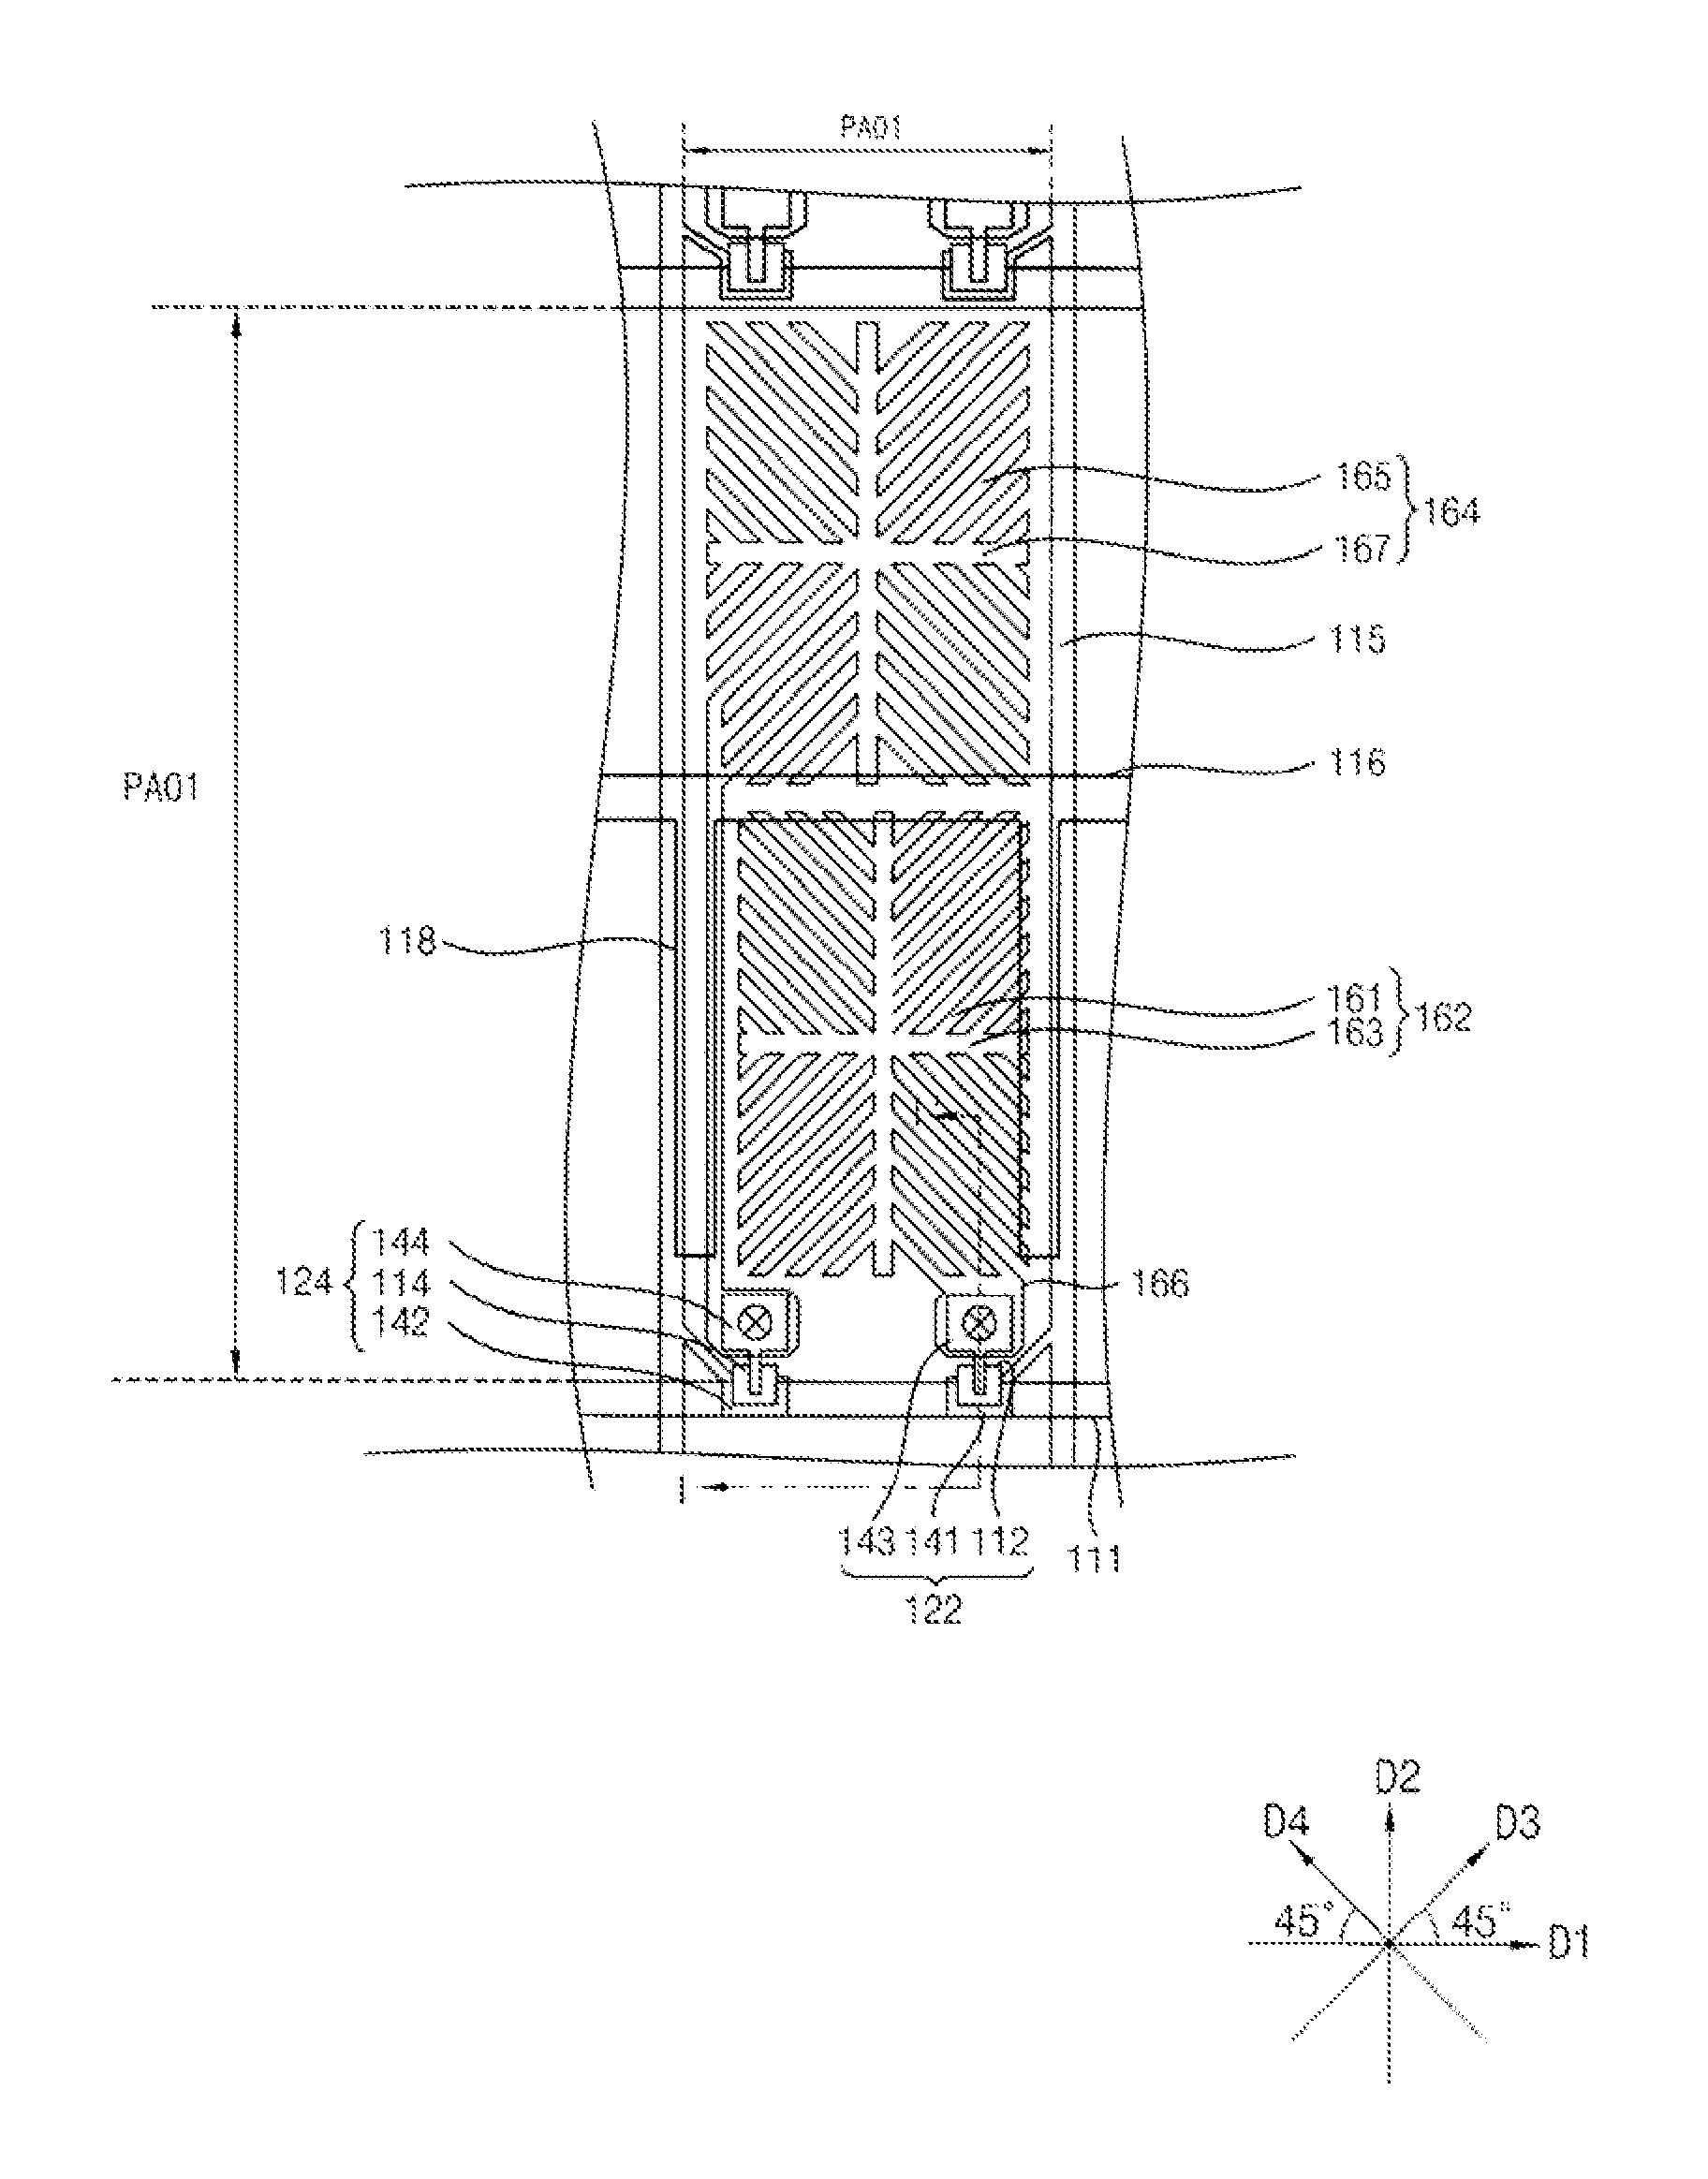 Liquid crystal display device, method of manufacturing the same and alignment layer composition for the liquid crystal display device